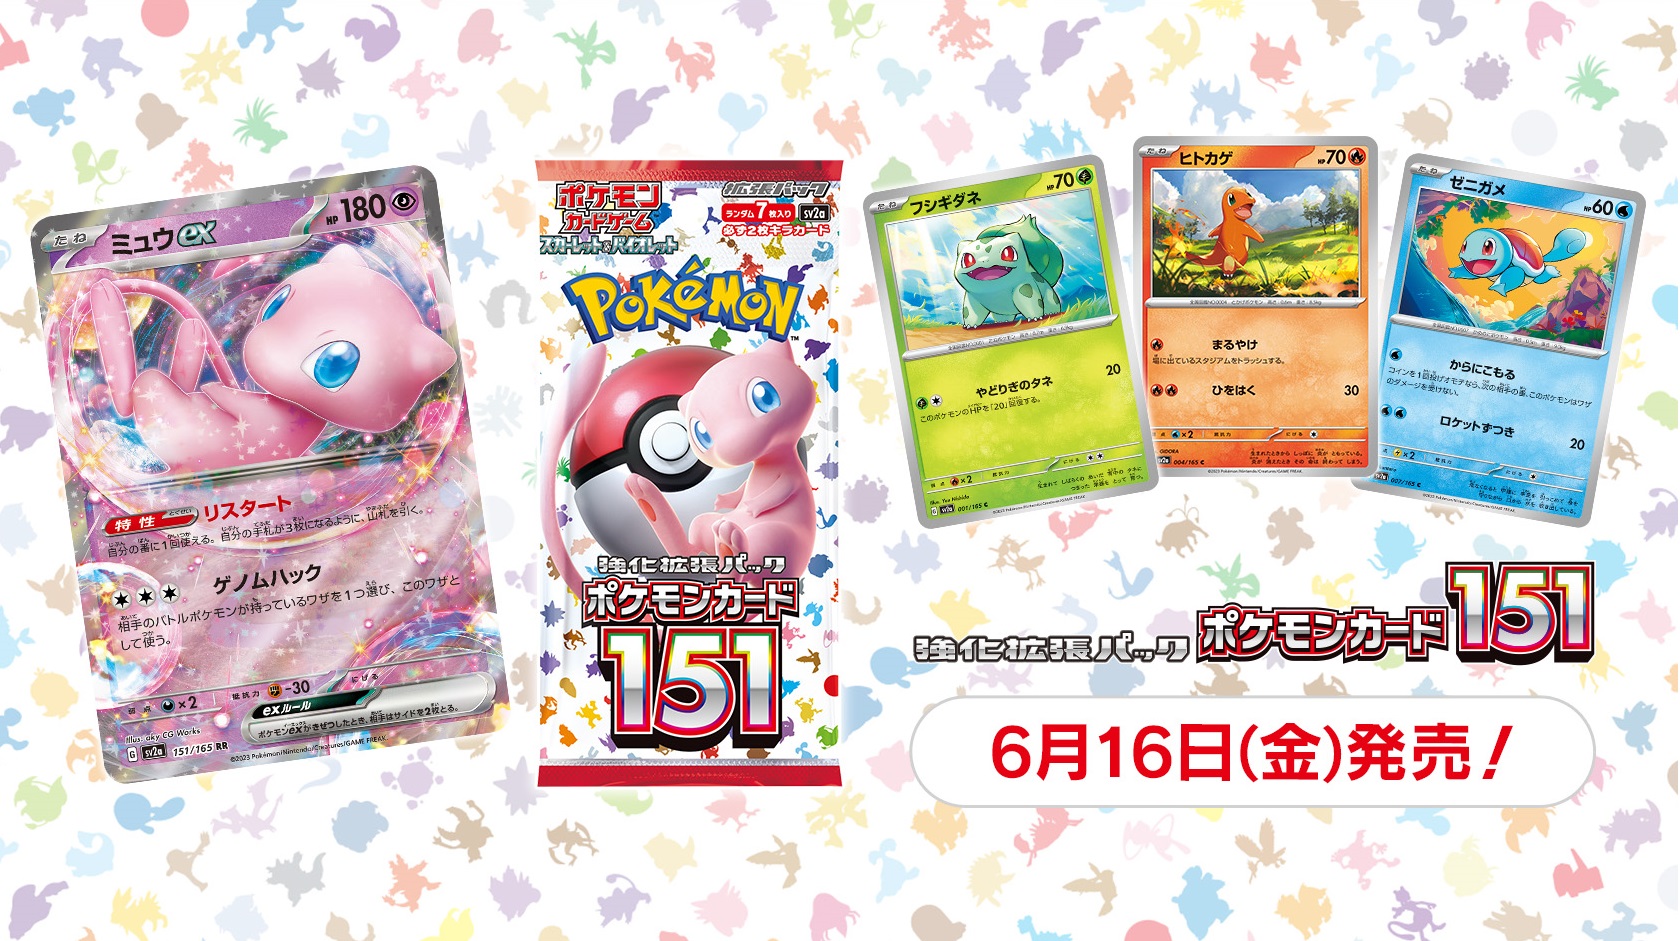 Full Lineup of English Pokemon Card 151 Products - and Pricing! 